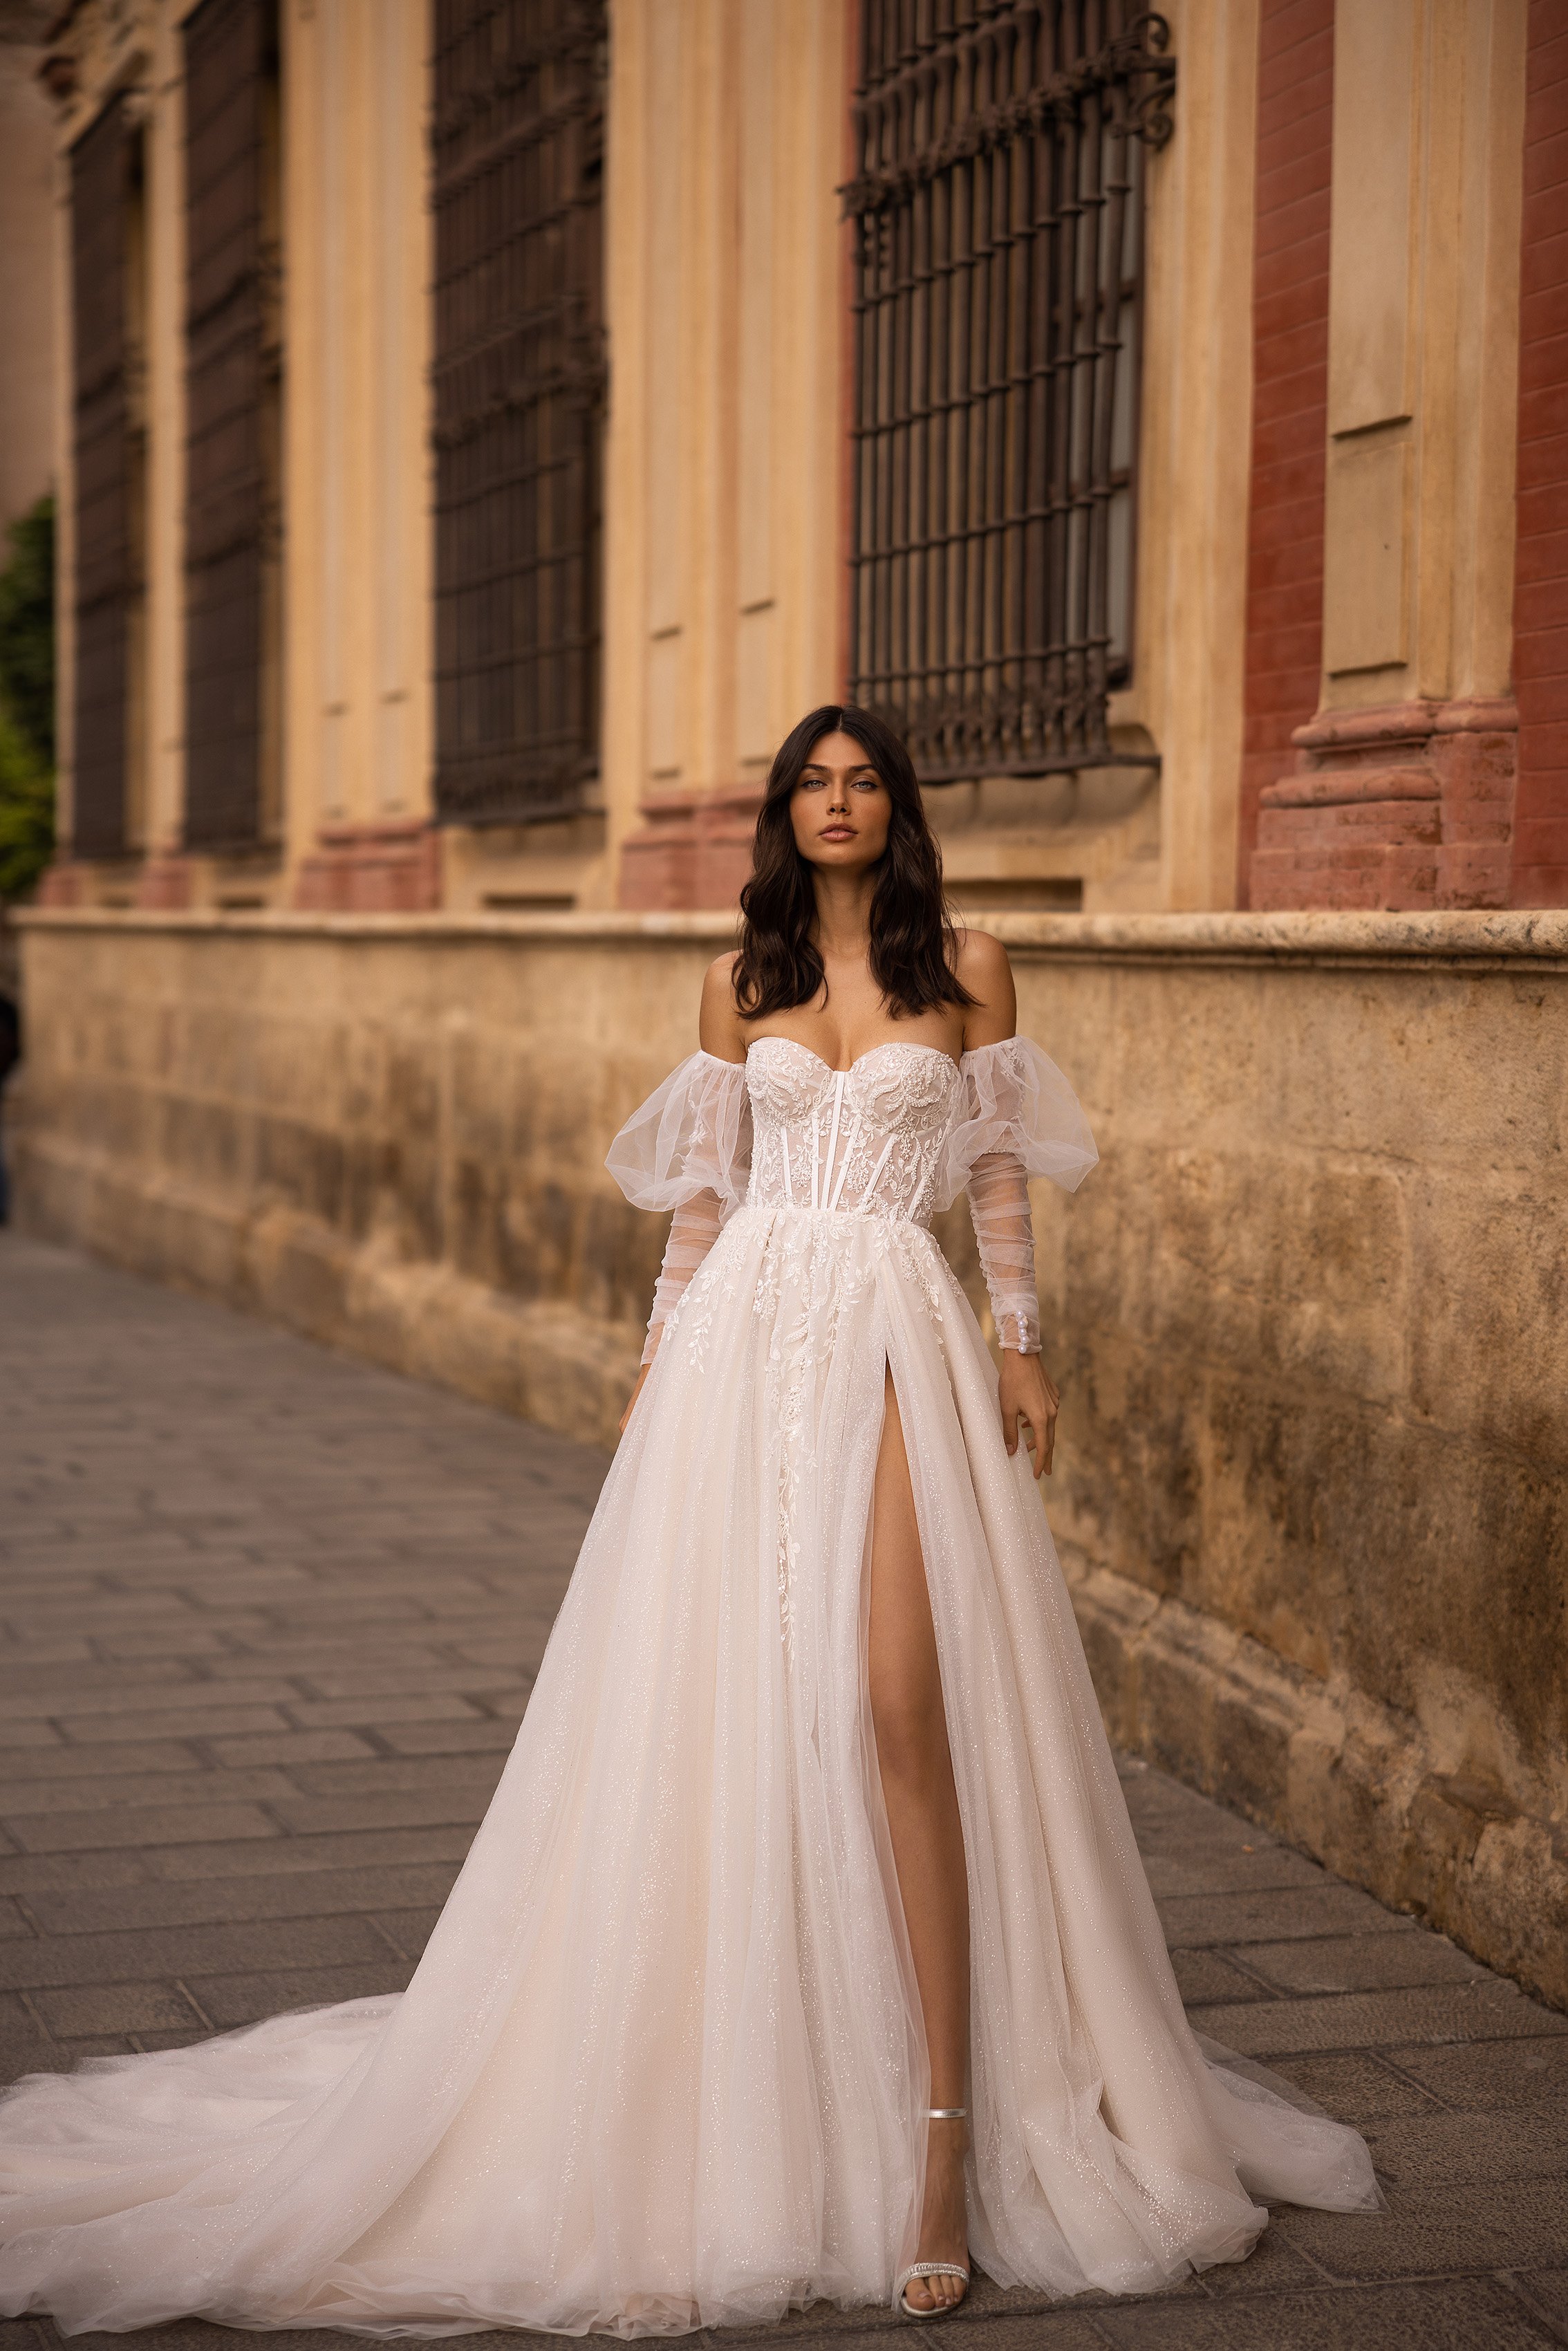 YOLANMY Chic Classic Wedding Dresses A-Line Pleat Long Sleeves